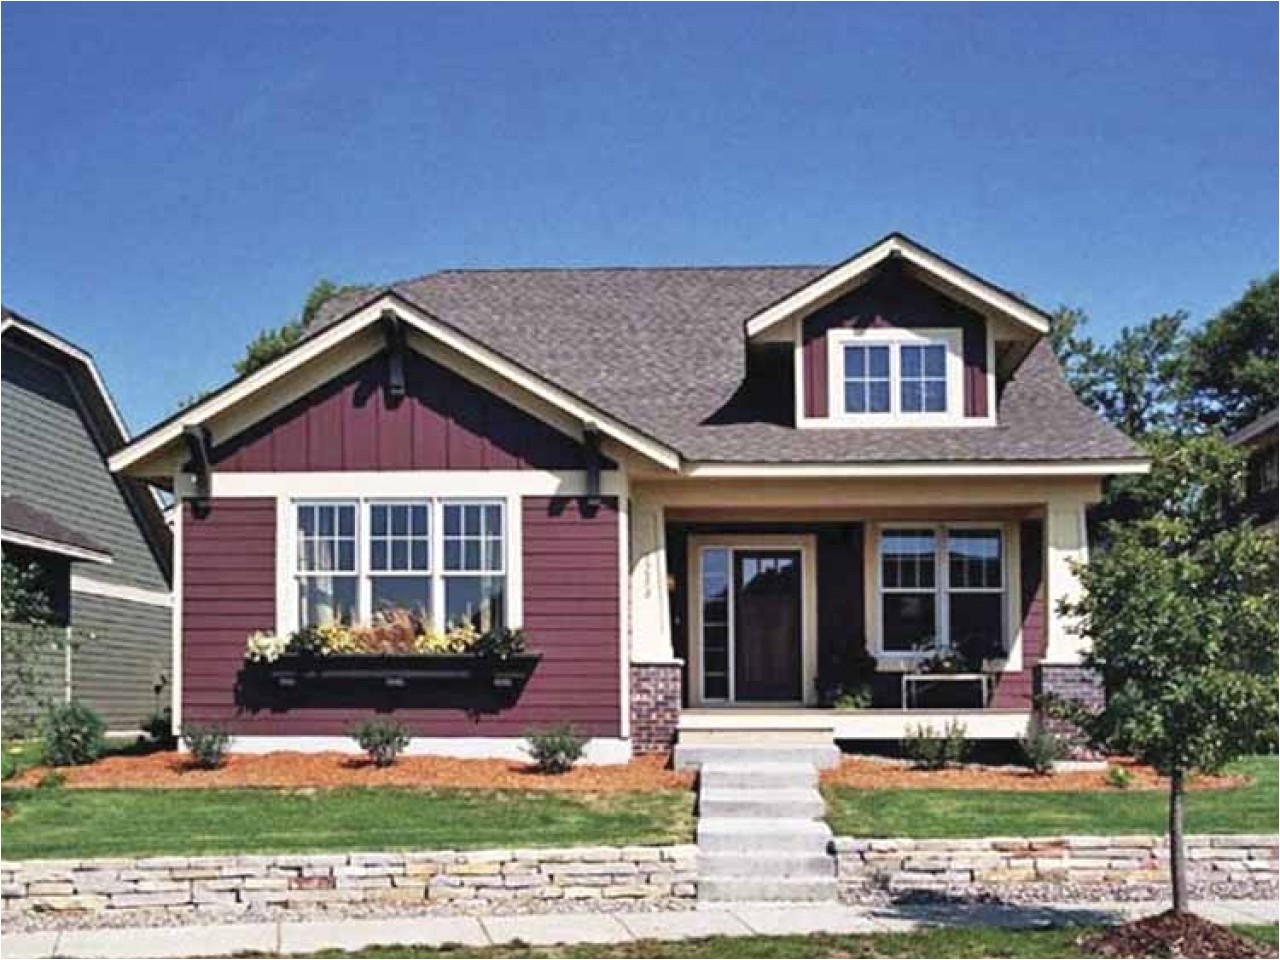 fd7d4cfd1d102459 single story craftsman bungalow house plans 2 story craftsman homes